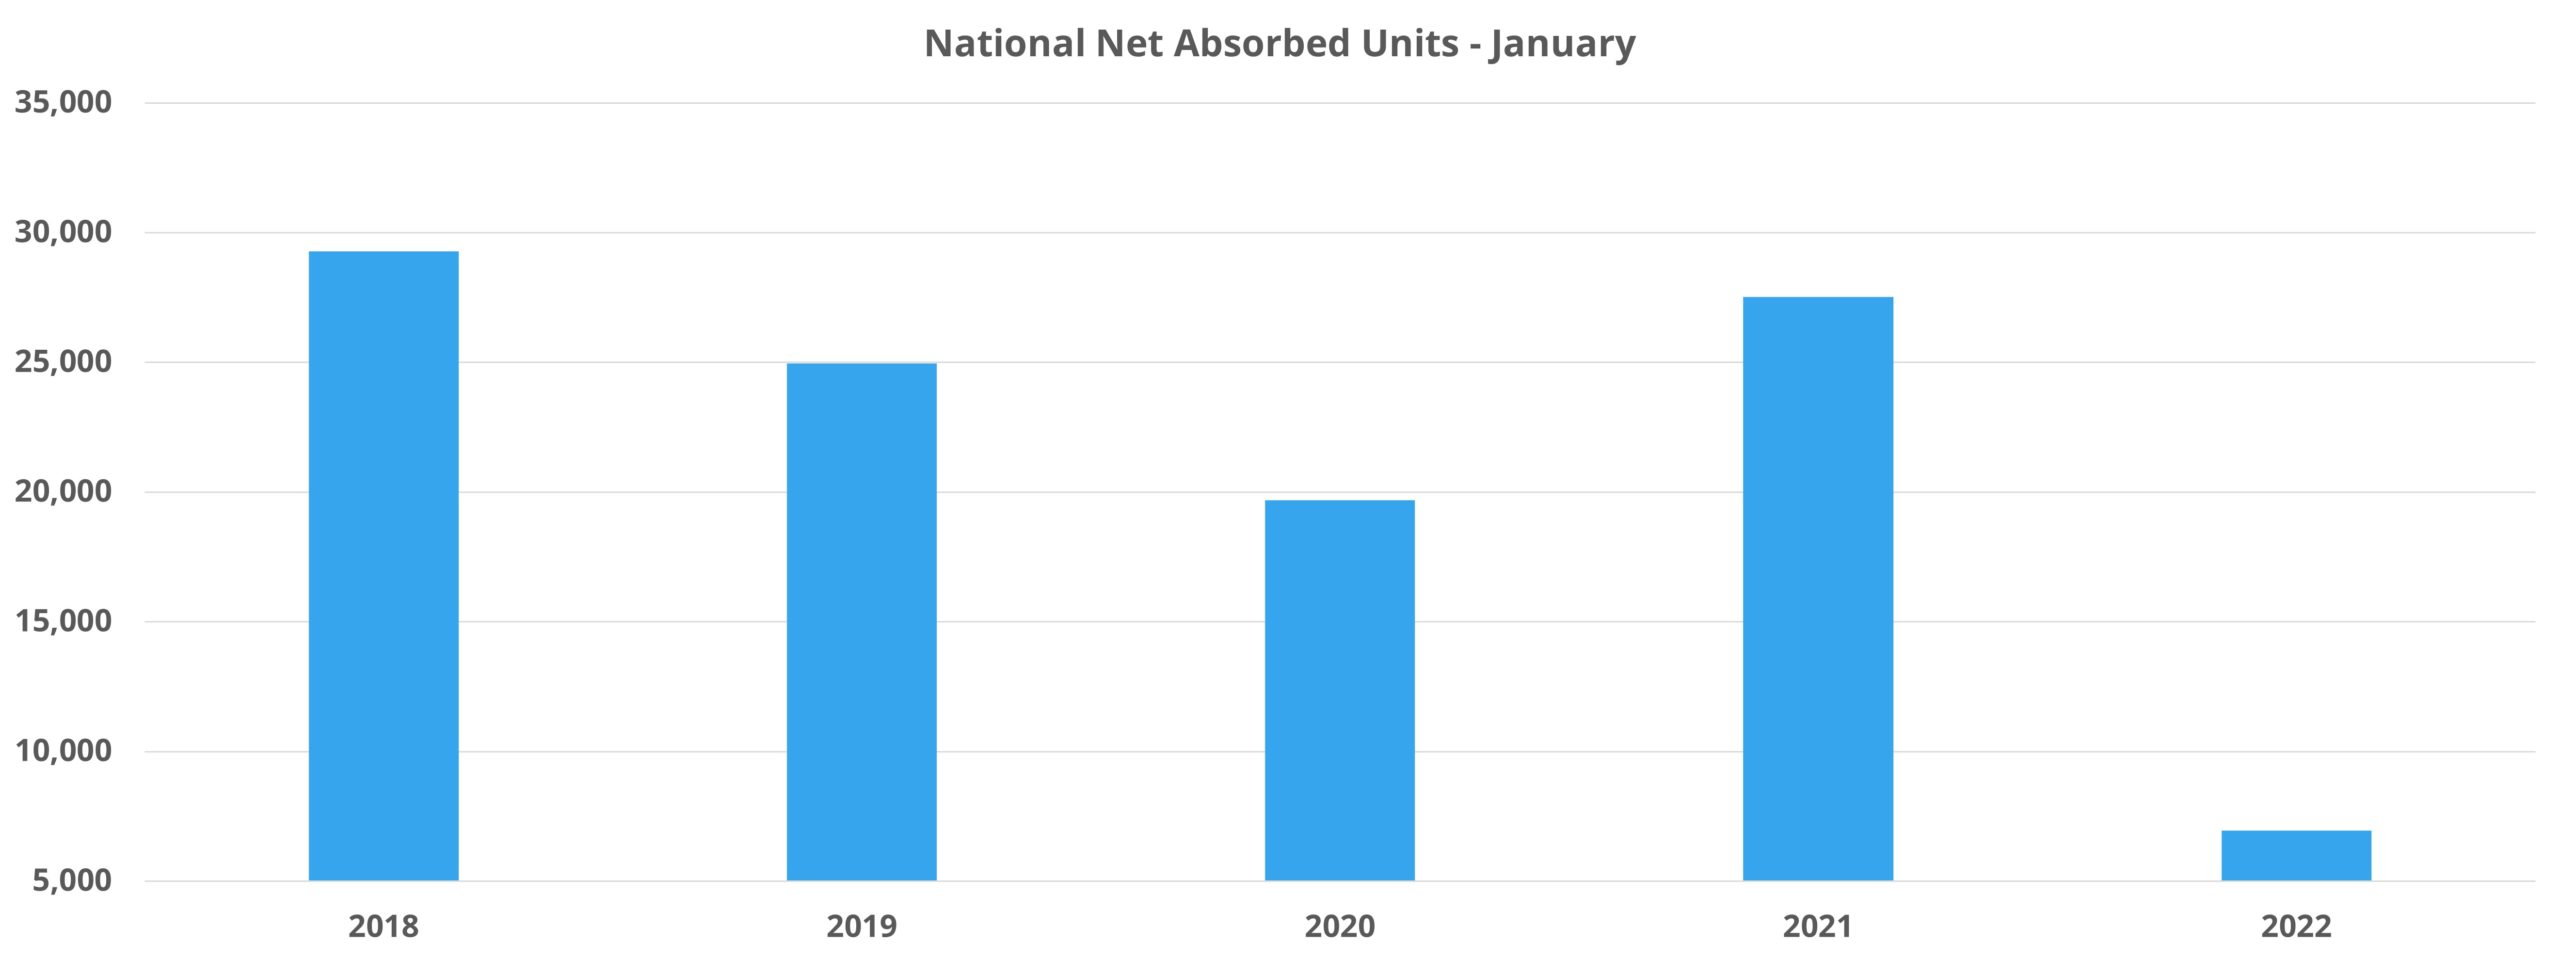 National Net Absorbed Units - January